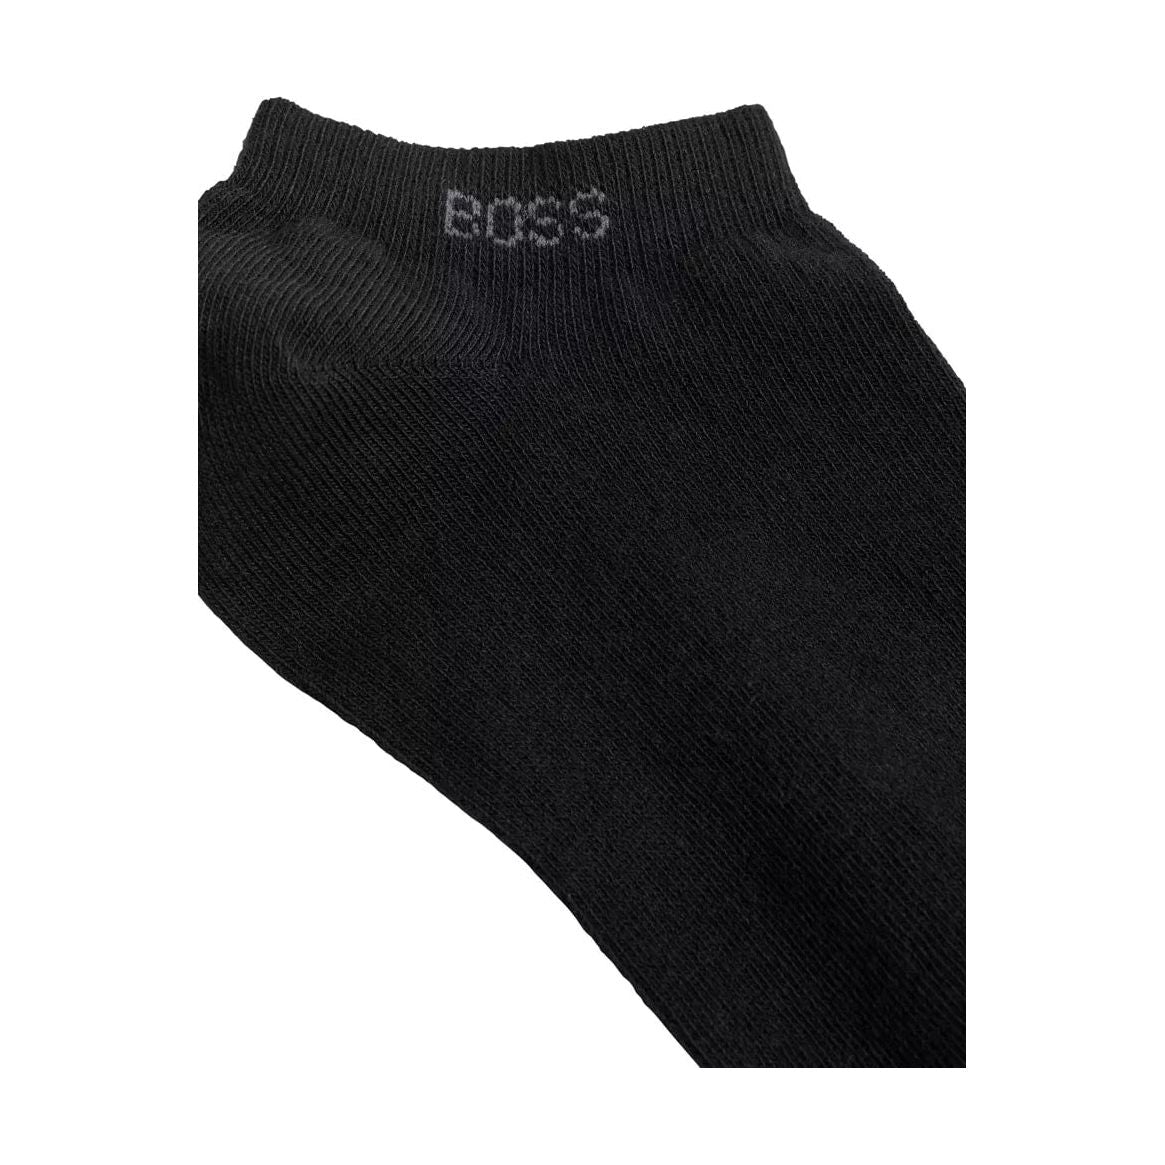 BOSS TWO-PACK OF ANKLE SOCKS IN A COTTON BLEND - Yooto